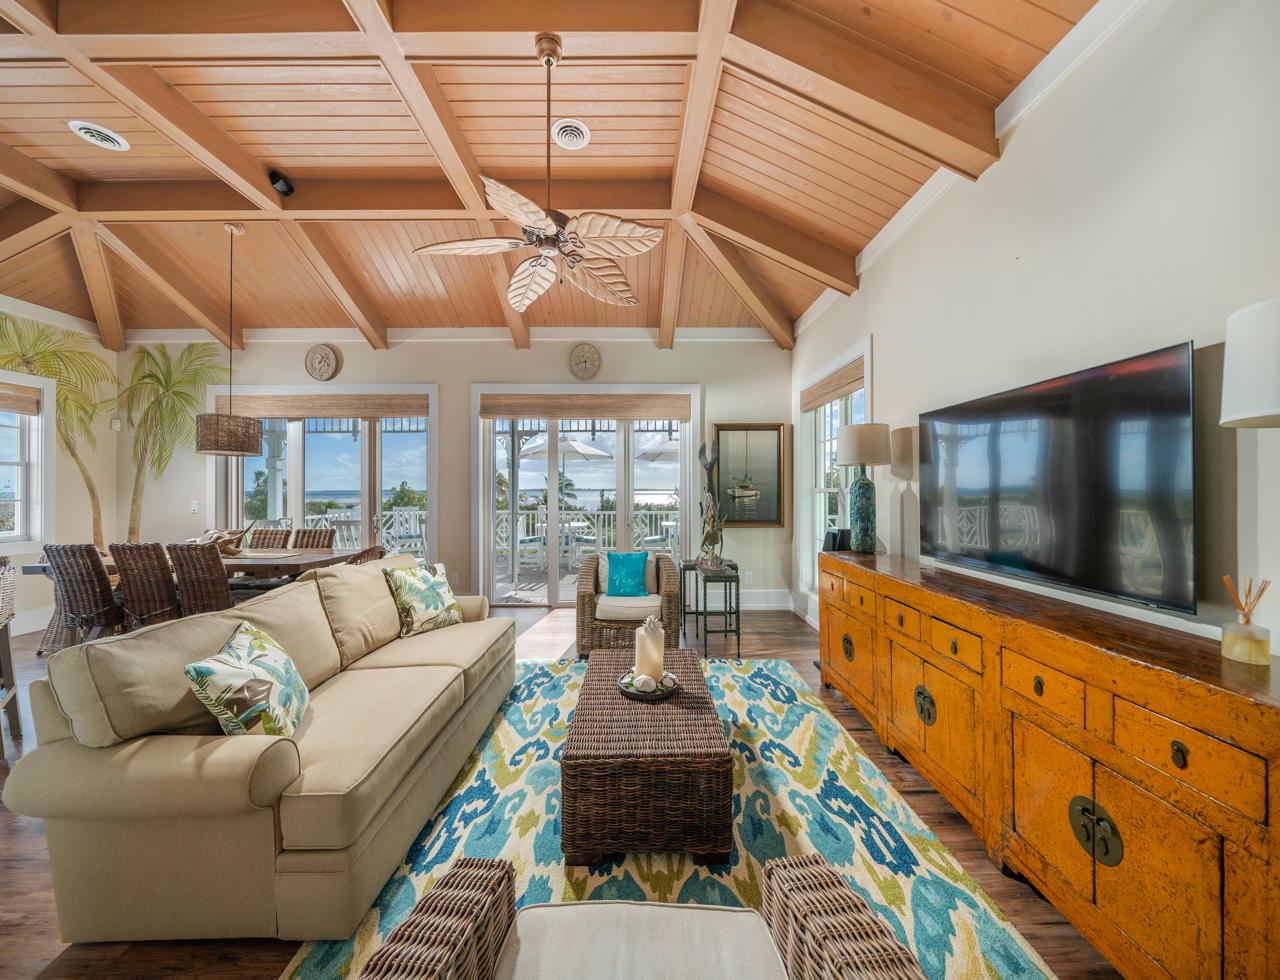 Green Turtle Cay Ocean View Home